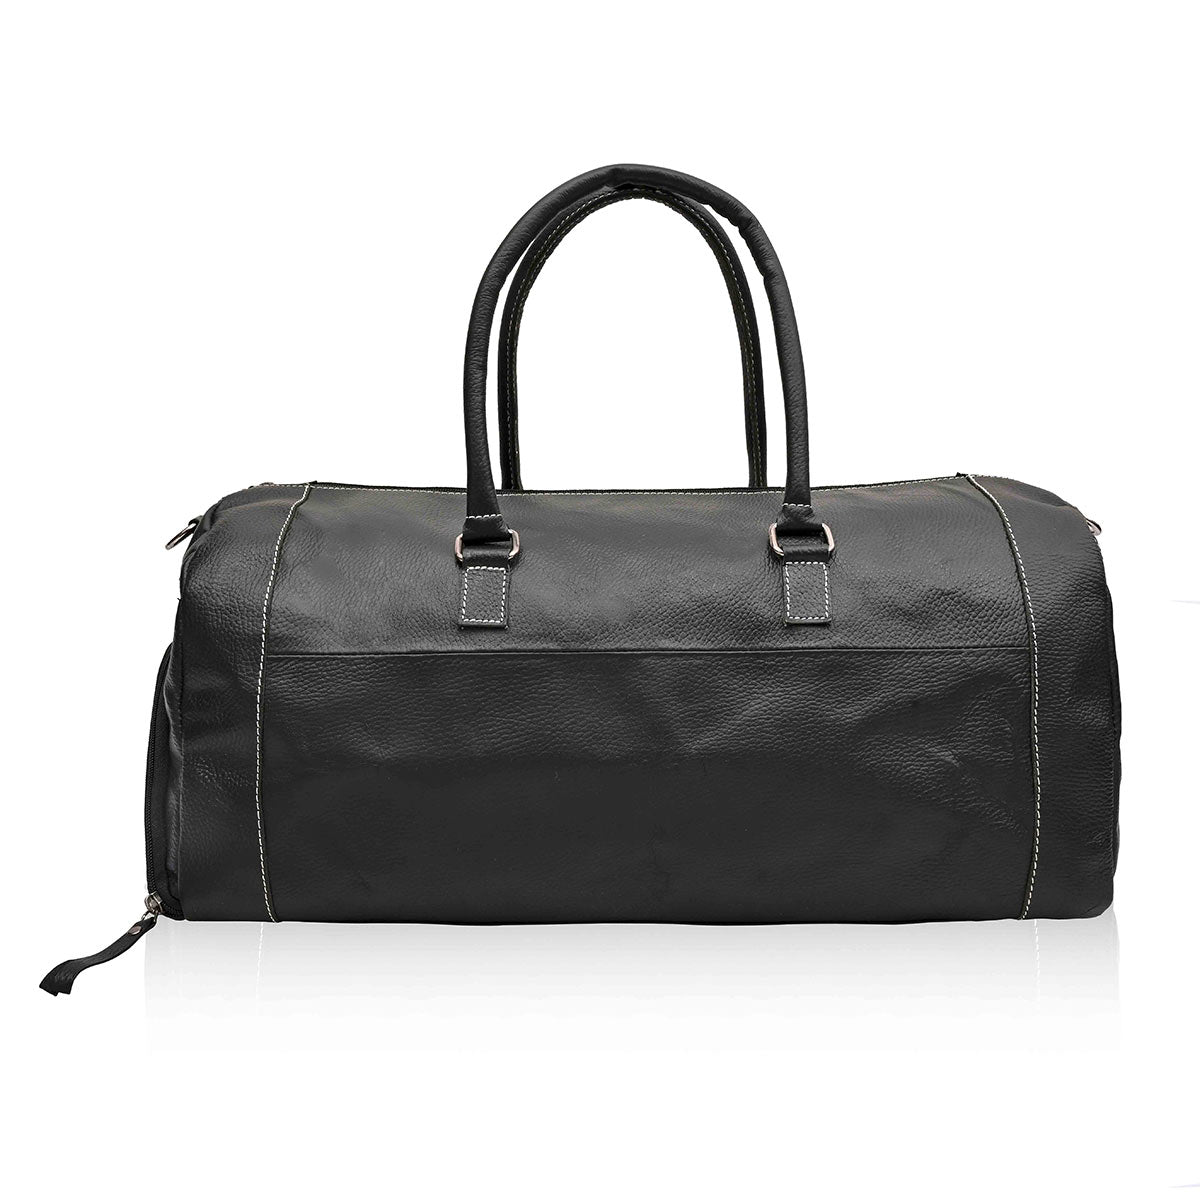 BlackPanther- Leather Duffle Bag 22 Inches